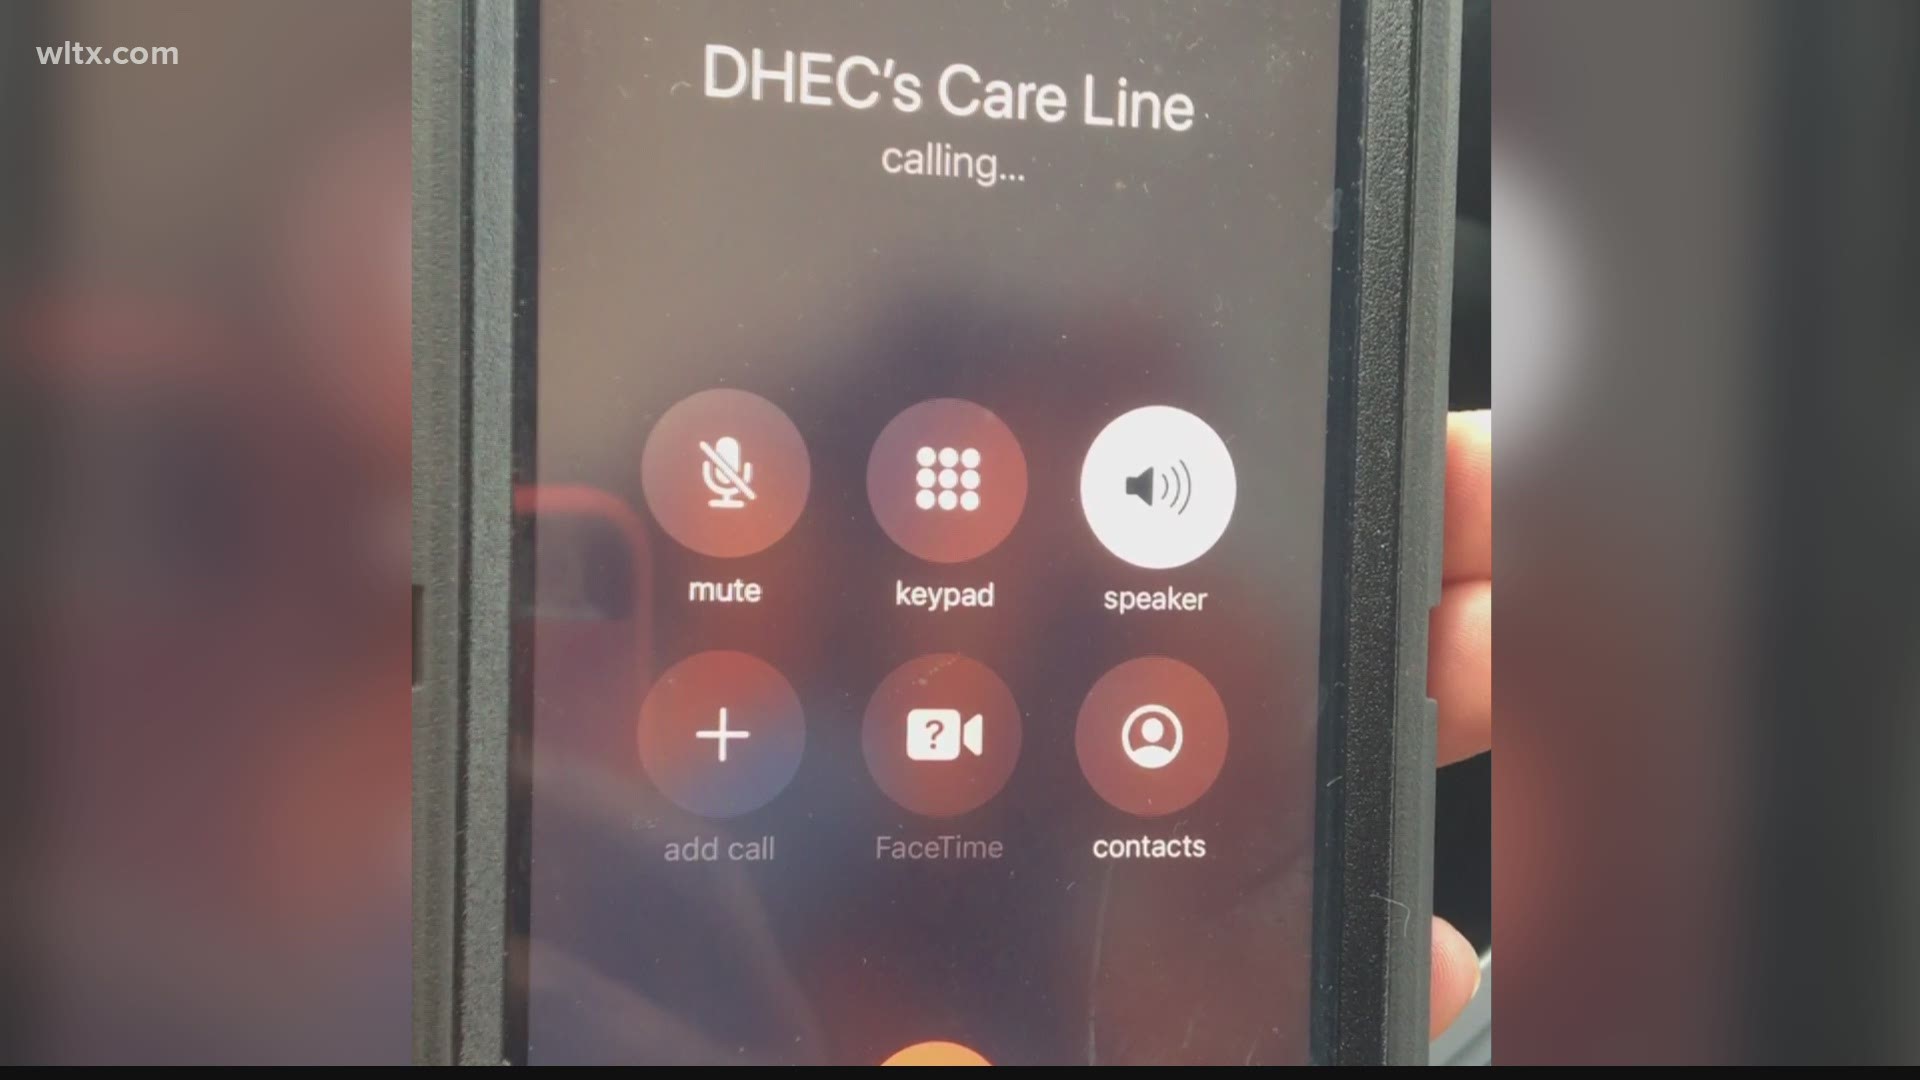 DHEC said they have received over 5,000 calls and for many its been a day of challenges.